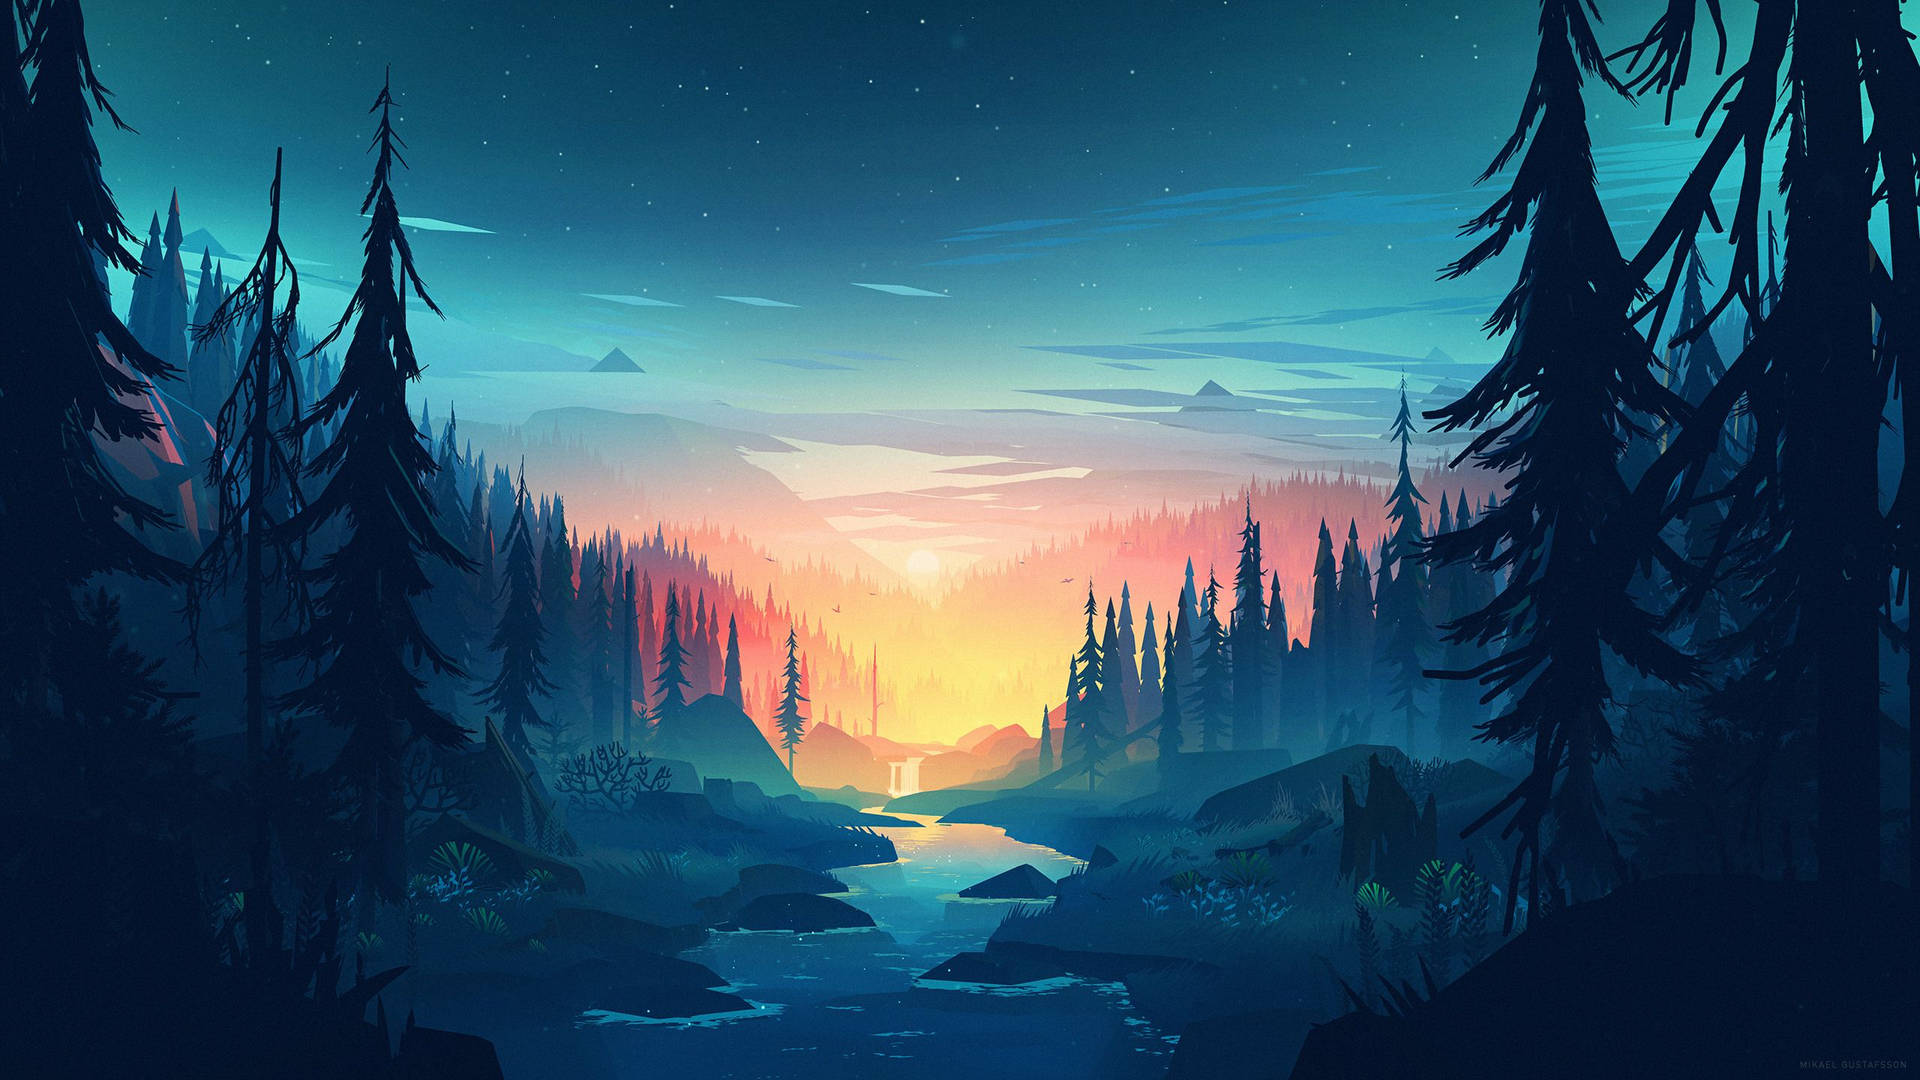 A peaceful, scenic landscape in the game Firewatch Wallpaper